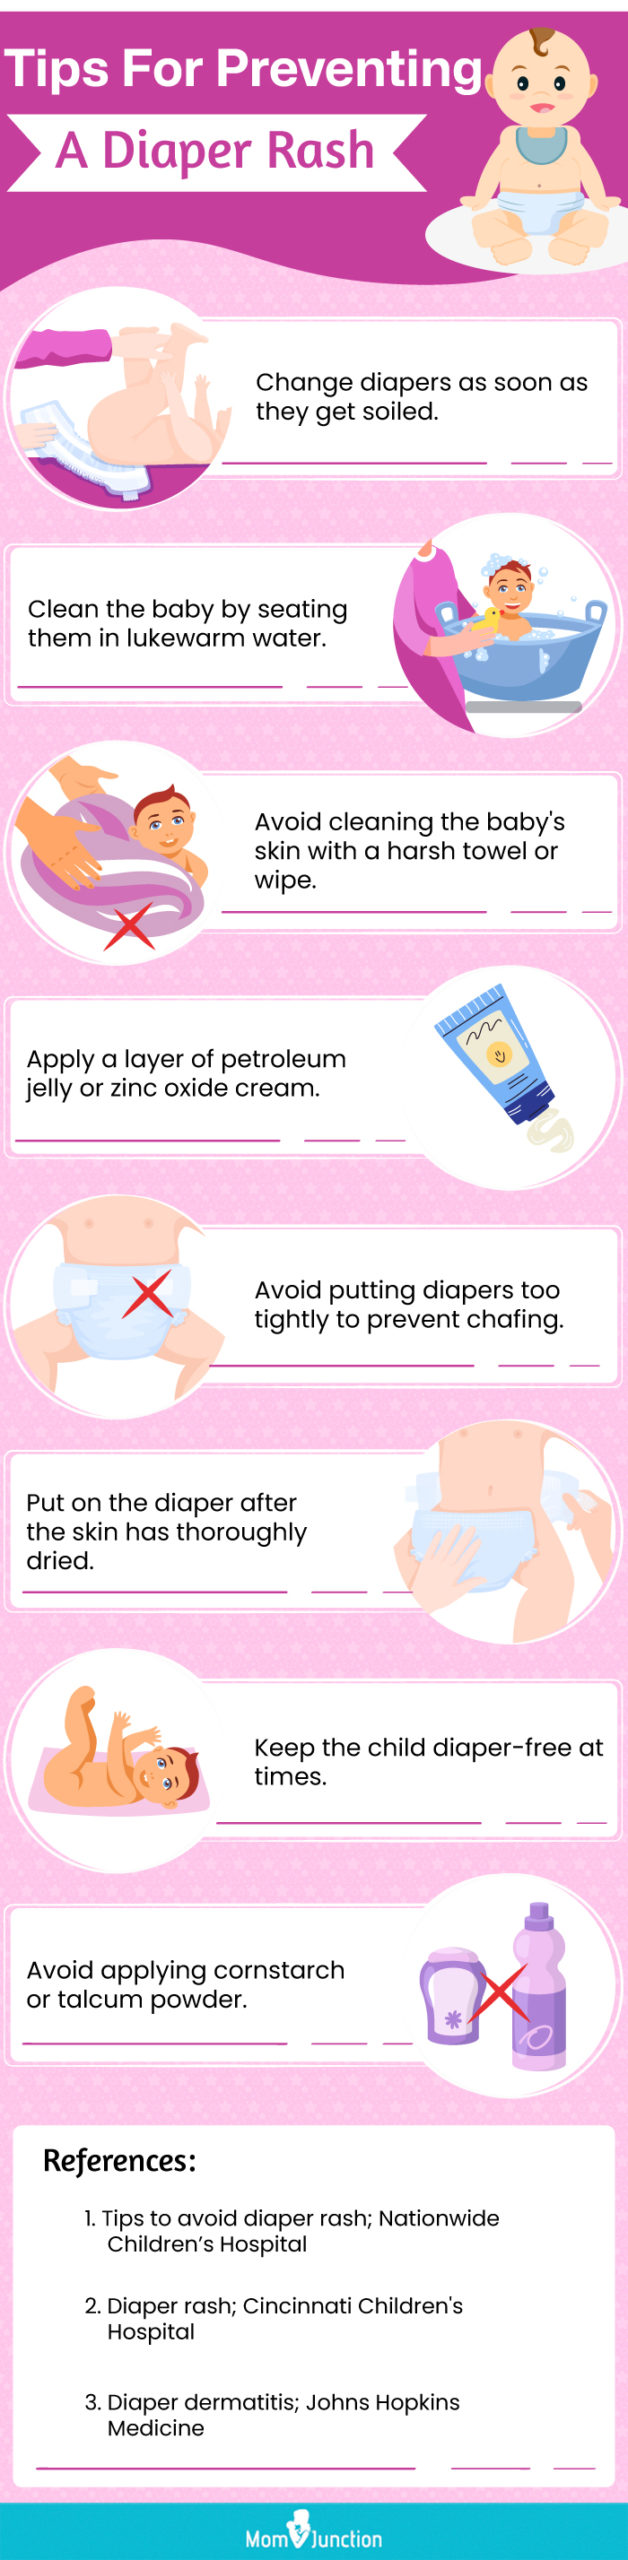 Tips For Preventing A Diaper Rash(infographic)